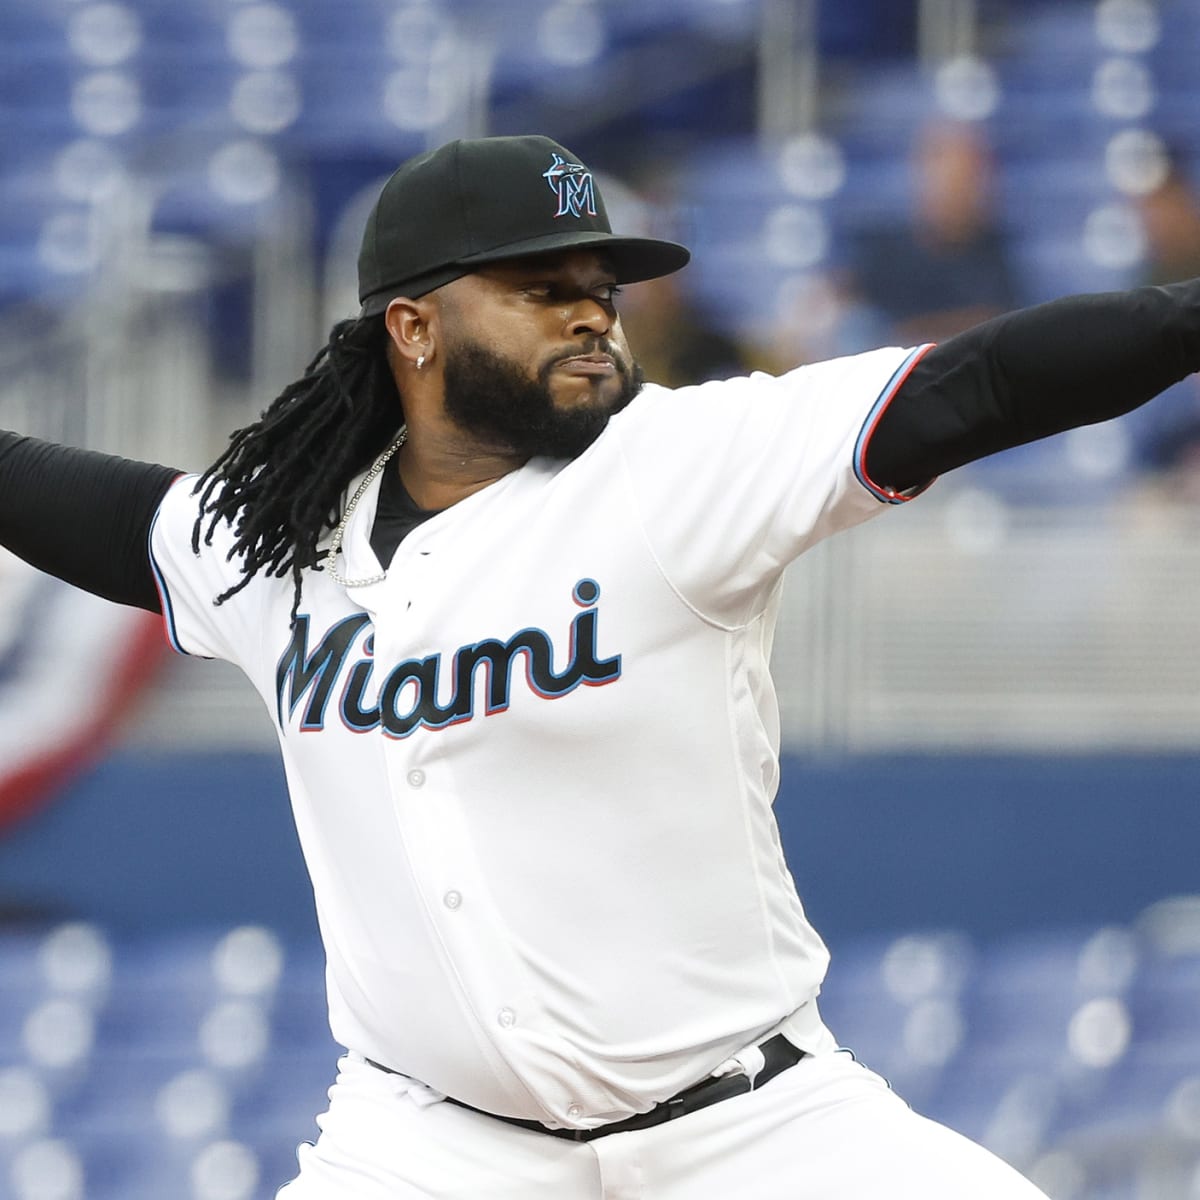 Miami Marlins' Johnny Cueto Getting Close to Returning From Injury